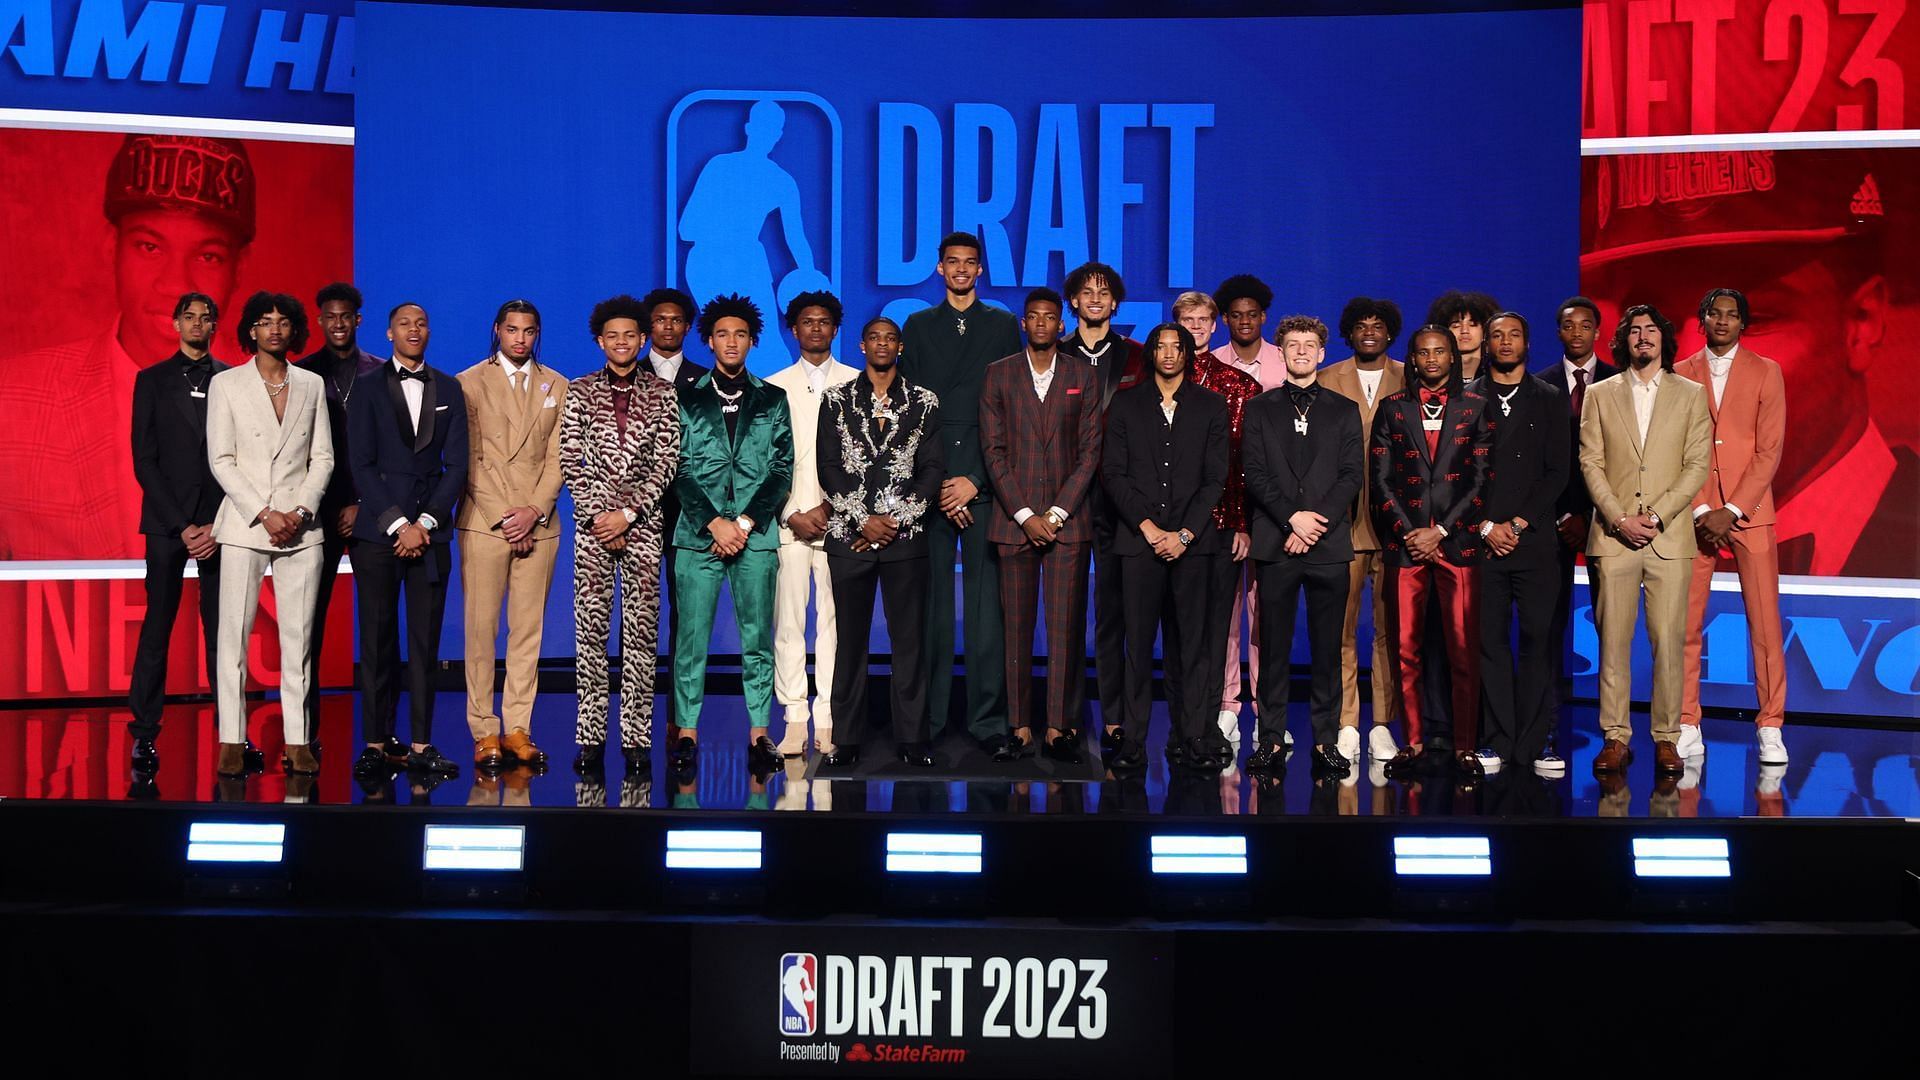 NBA Draft Suits 2018: An Exhaustive Ranking